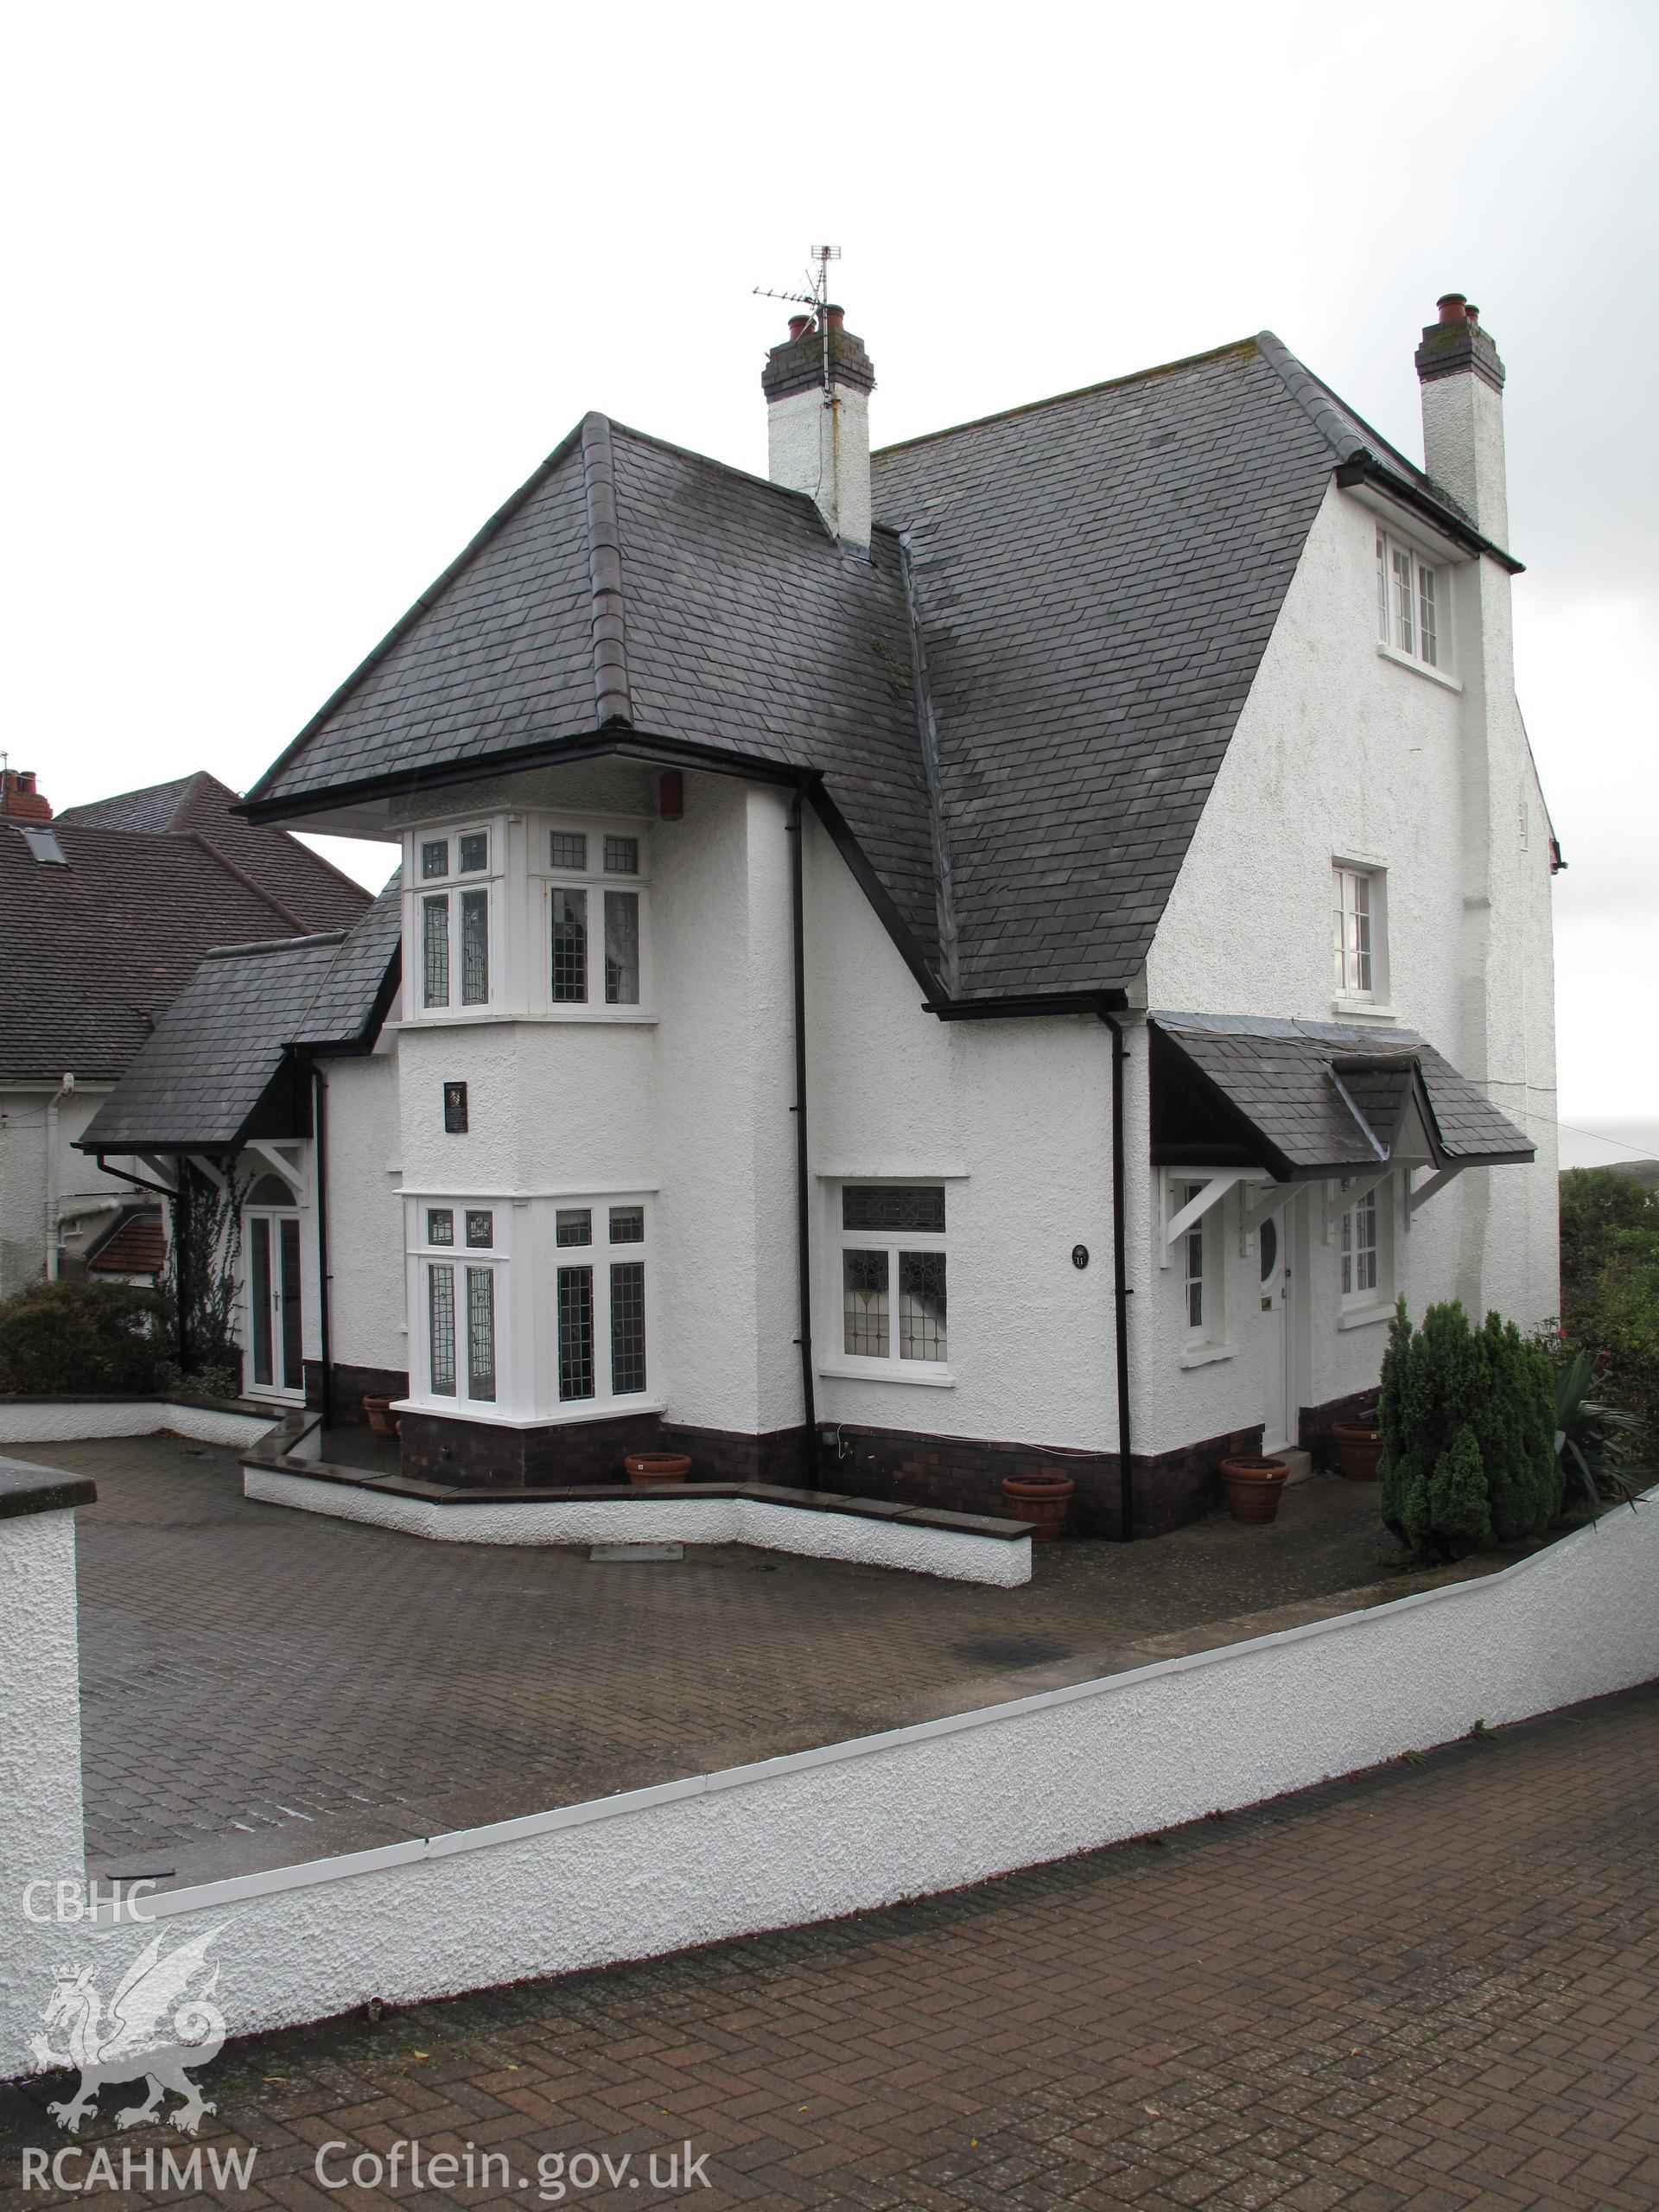 No.11 Porth-y-castell, Barry Garden Suburb, taken by Brian Malaws on 20 October 2010.